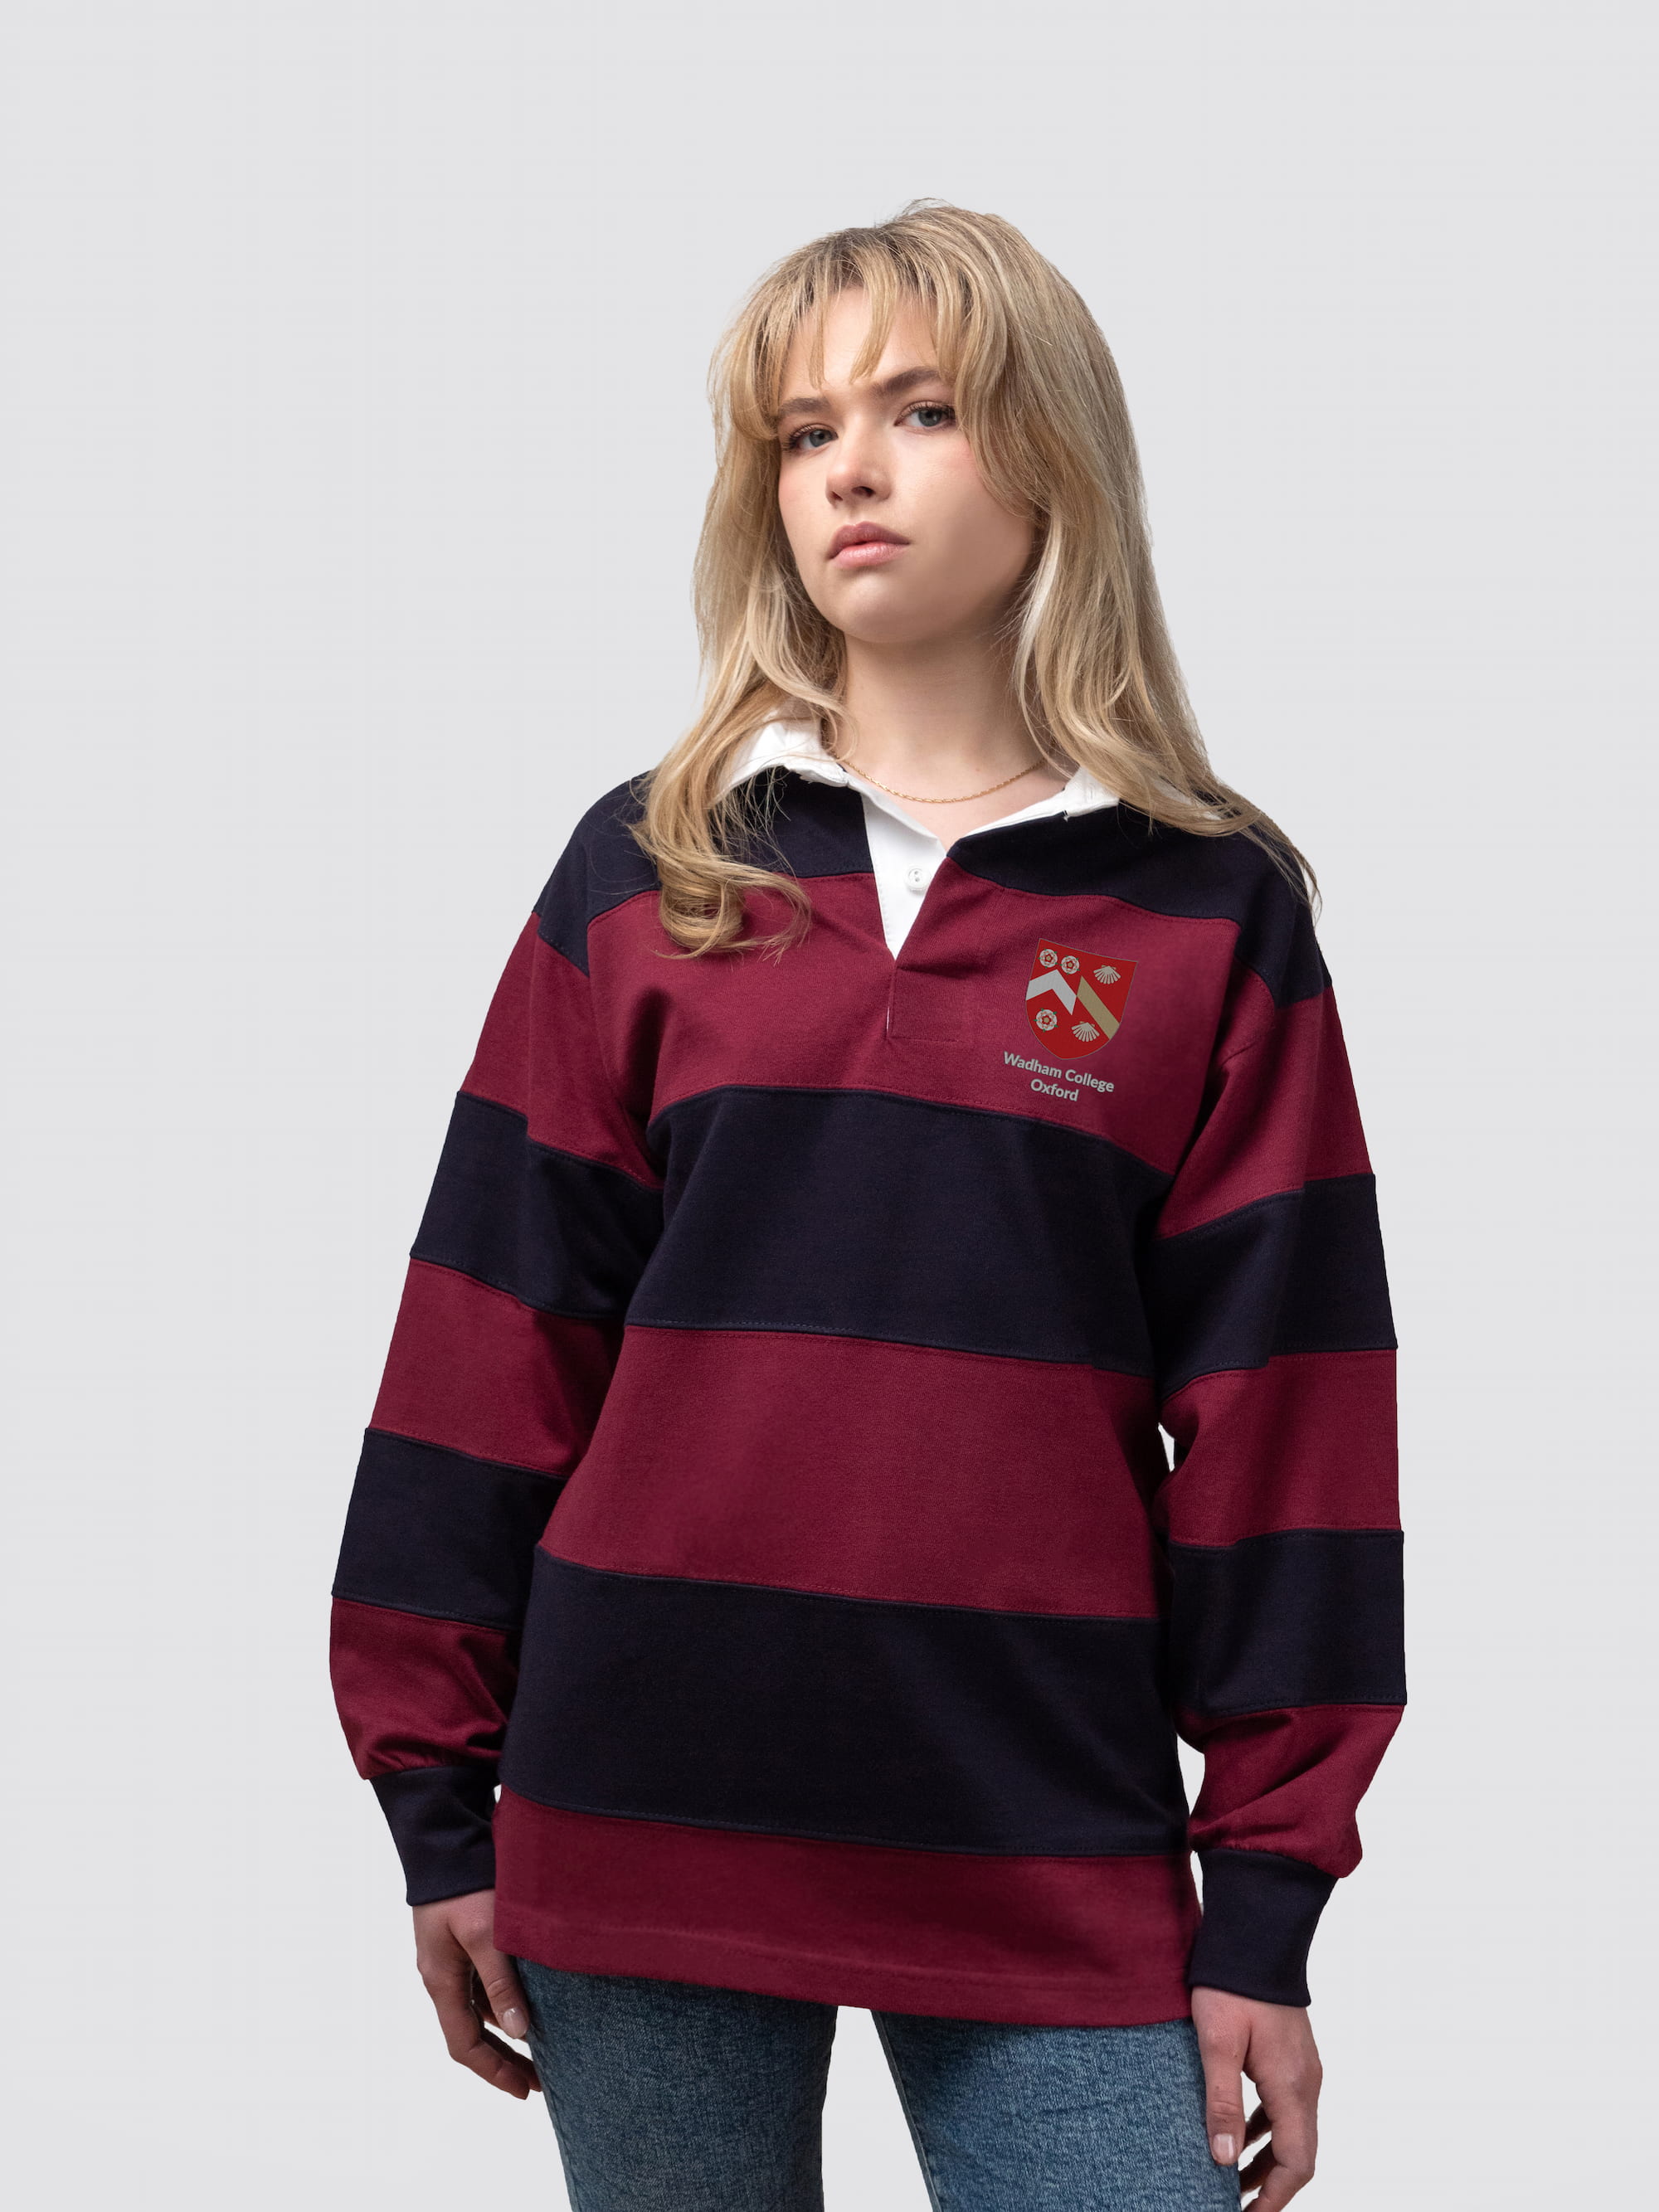 Wadham College rugby shirt, with burgundy and navy stripes